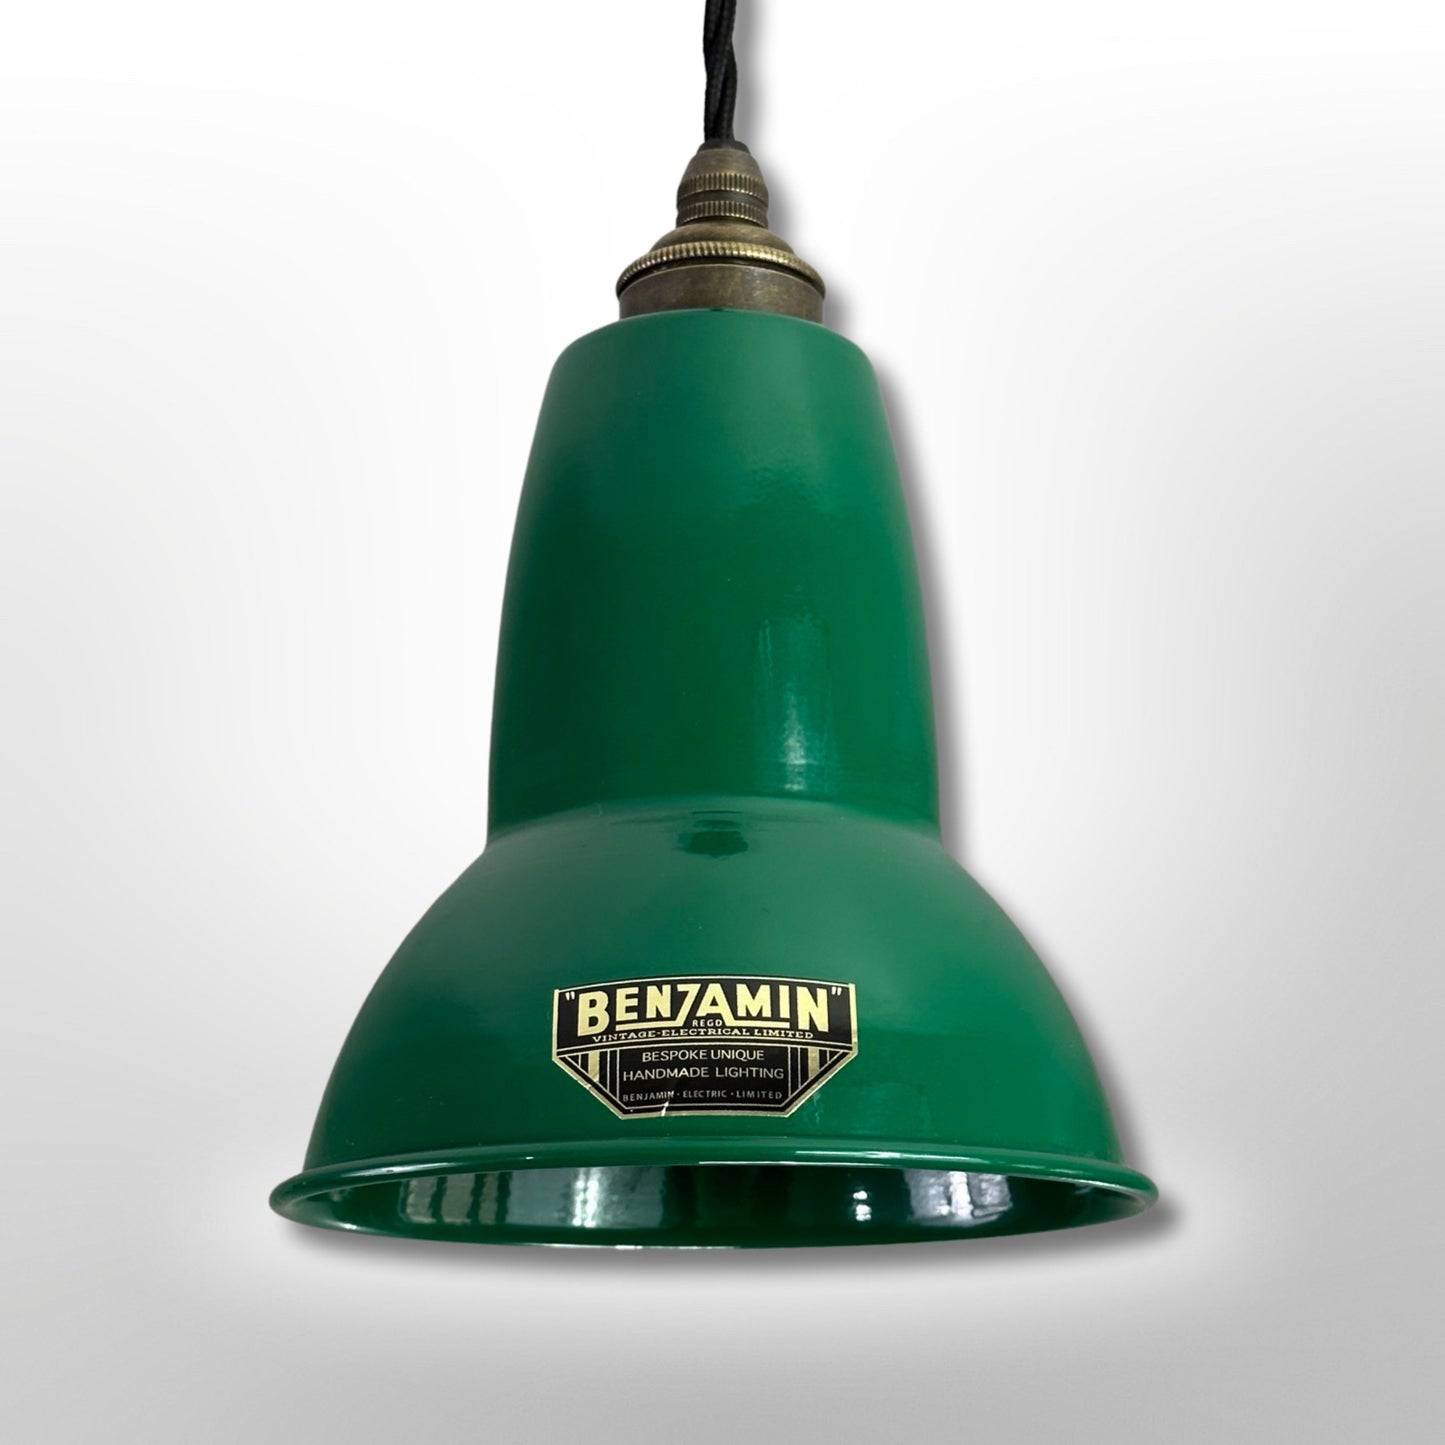 Alby ~ Racing Green Shade Pendant Set Light | Ceiling Dining Room | Kitchen Table | Vintage Edison Filament Bulb | 6 Inch